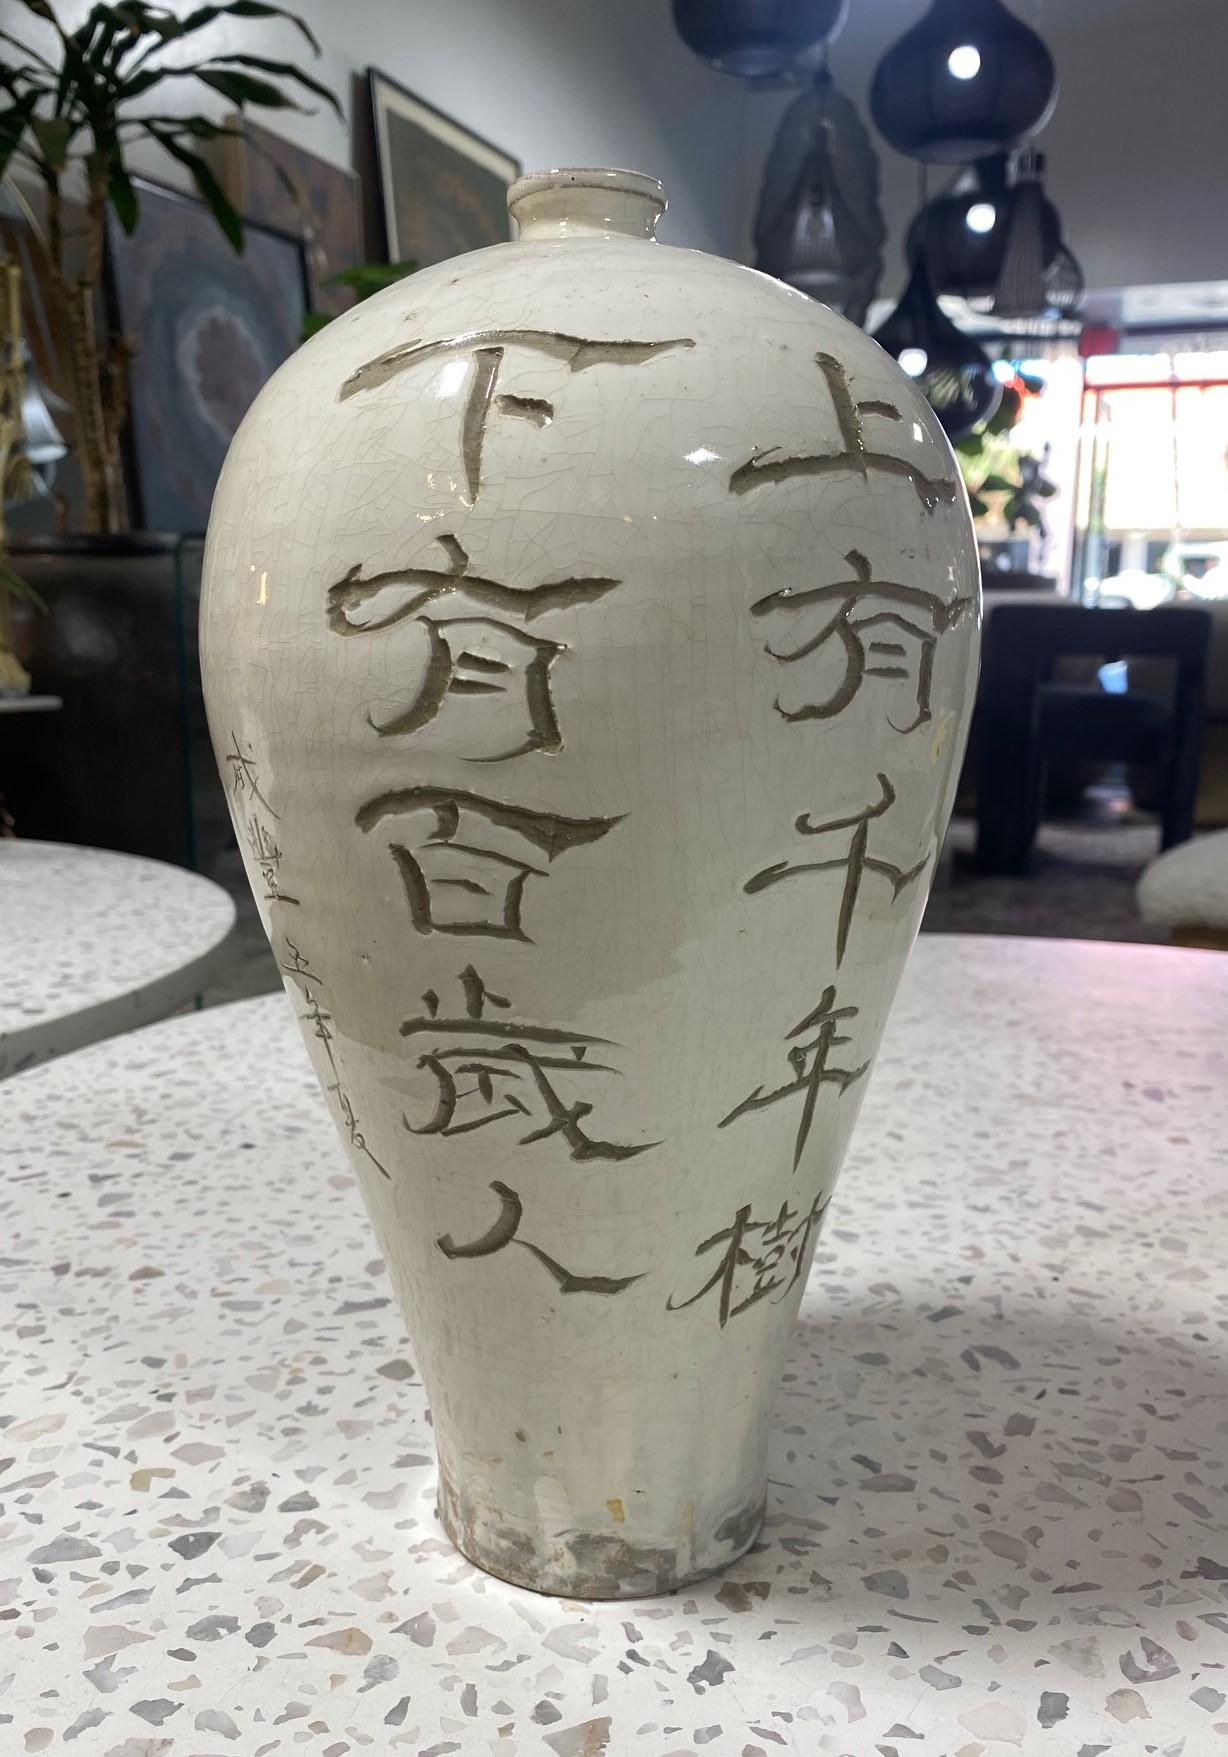 A beautifully white crackle-glazed and colored, hand-decorated Korean Buncheong bottle vase. Joseon Dynasty (1392-1910). Very nice patina. Radiates in the light.  

We are listing it as 19th century but could be older. 

Would be a great addition to